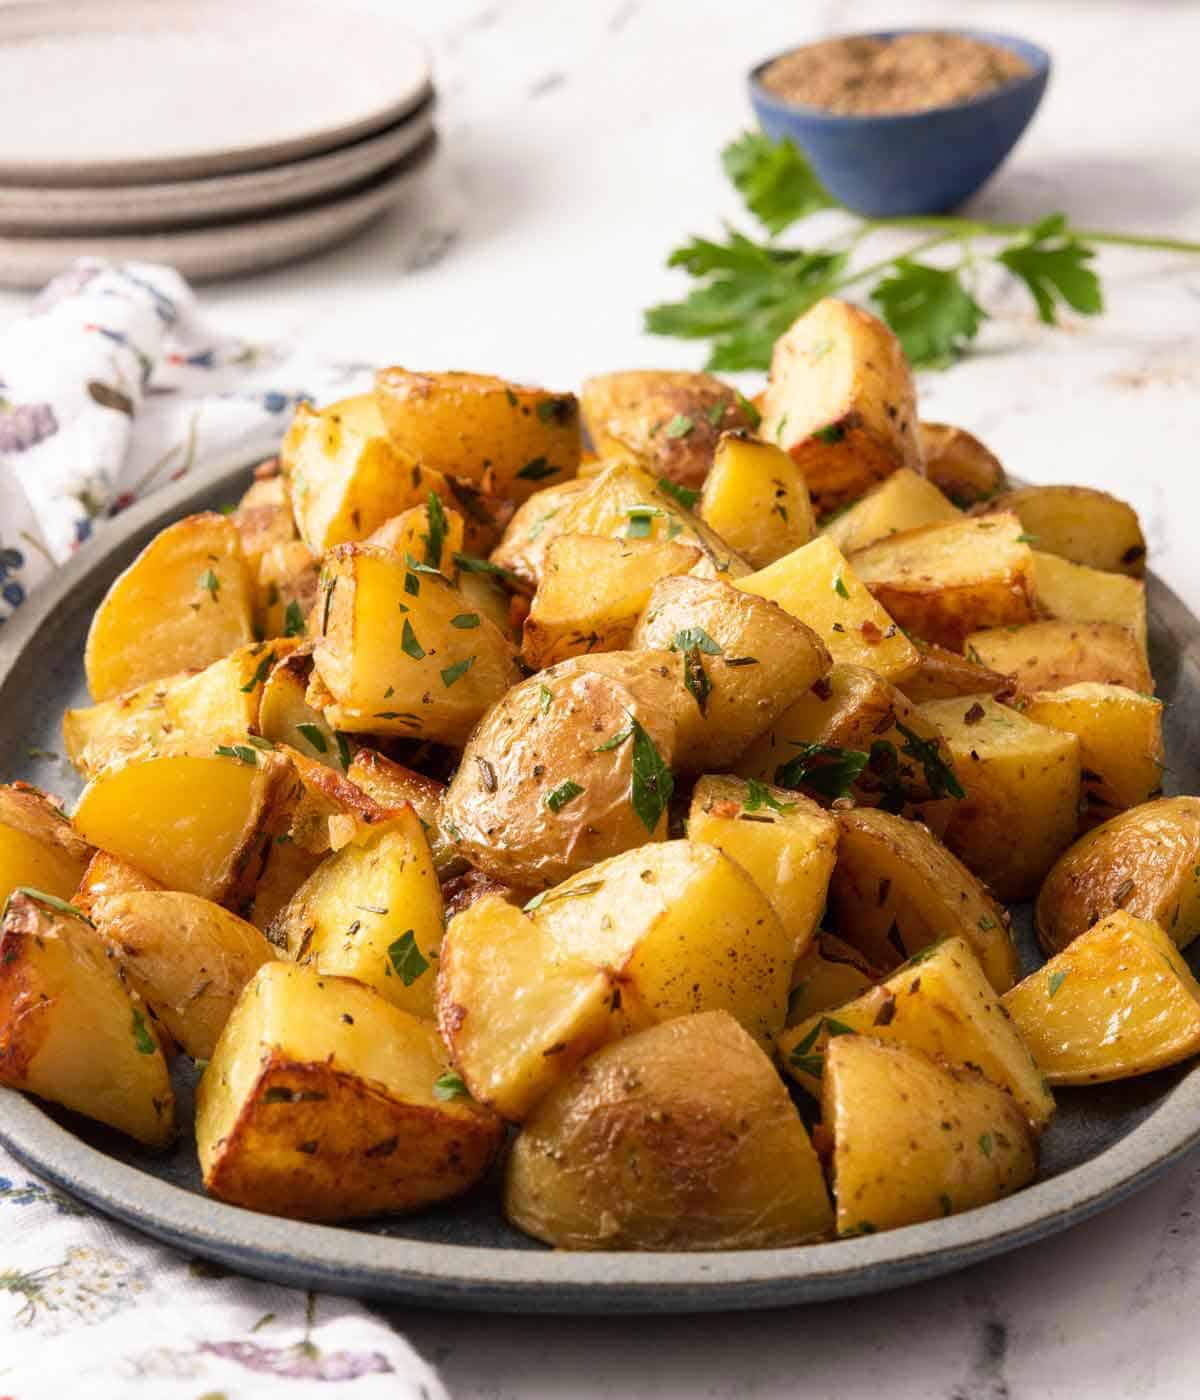 A platter of roasted potatoes with chopped parsley as garnish and a pinch bowl of pepper in the back.